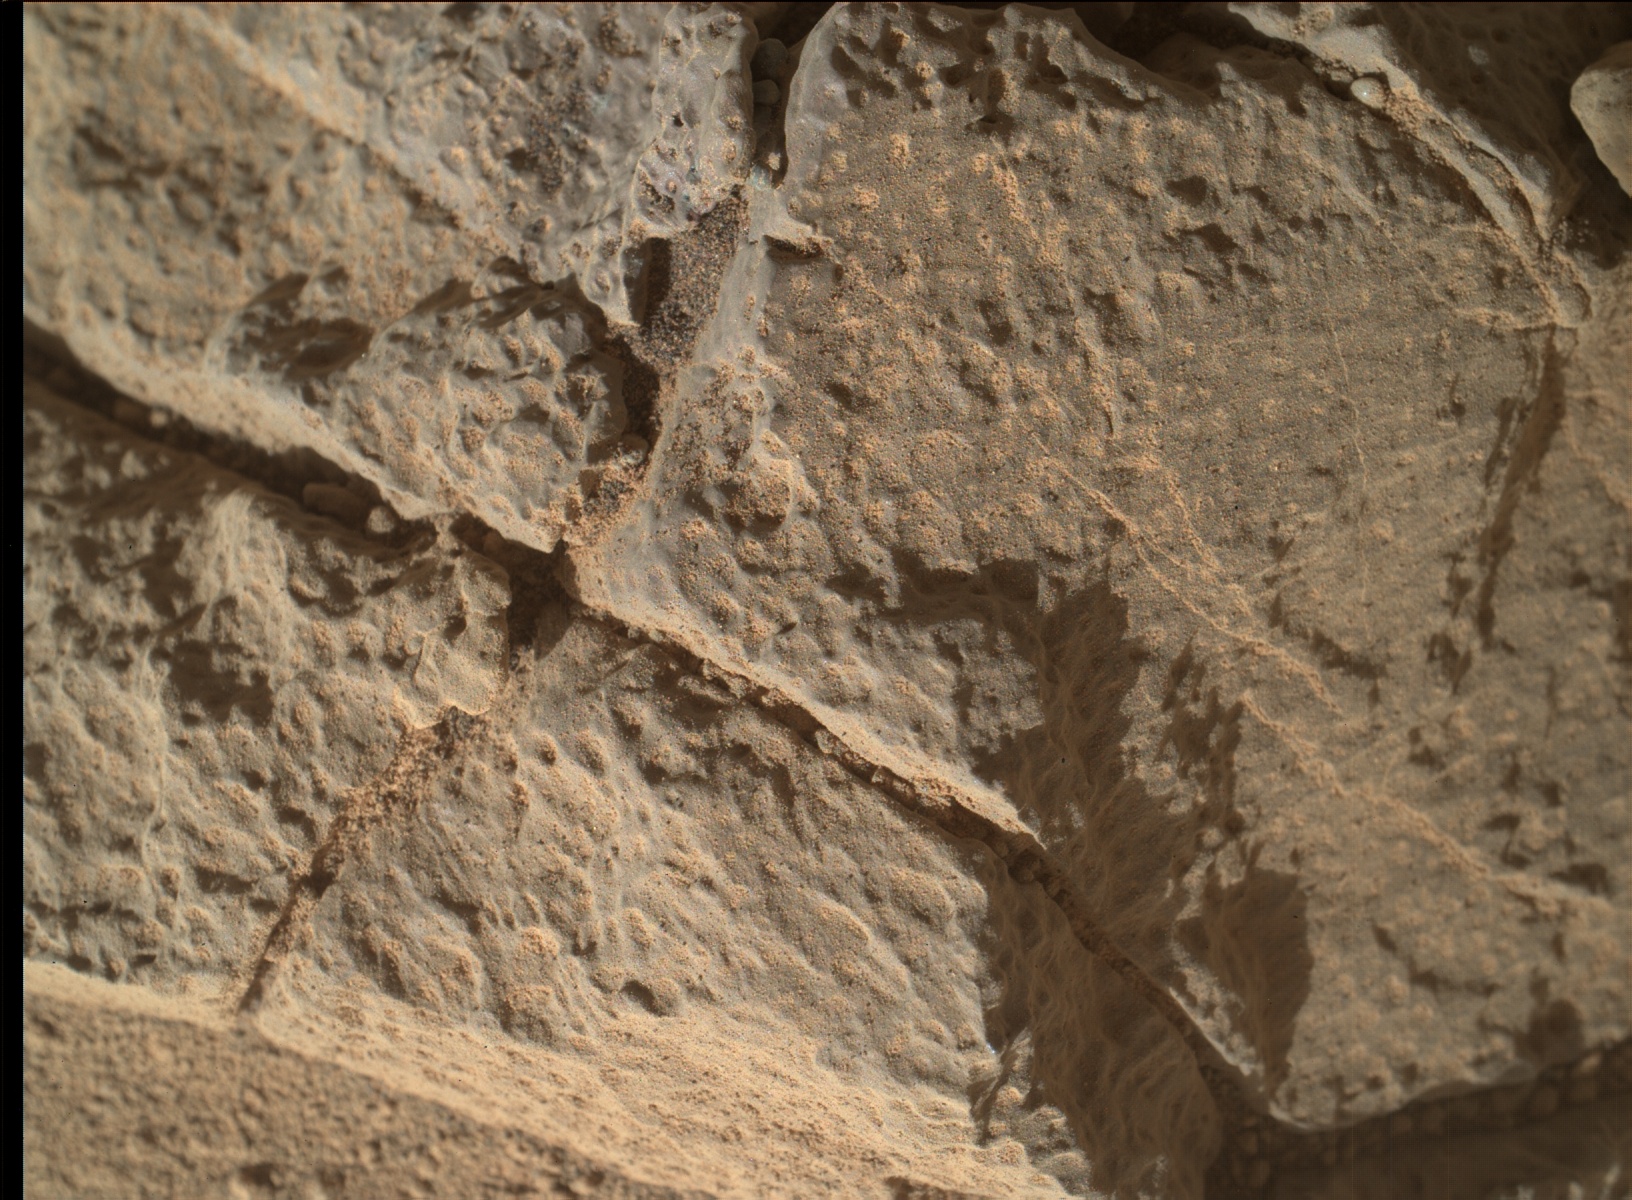 Nasa's Mars rover Curiosity acquired this image using its Mars Hand Lens Imager (MAHLI) on Sol 1375